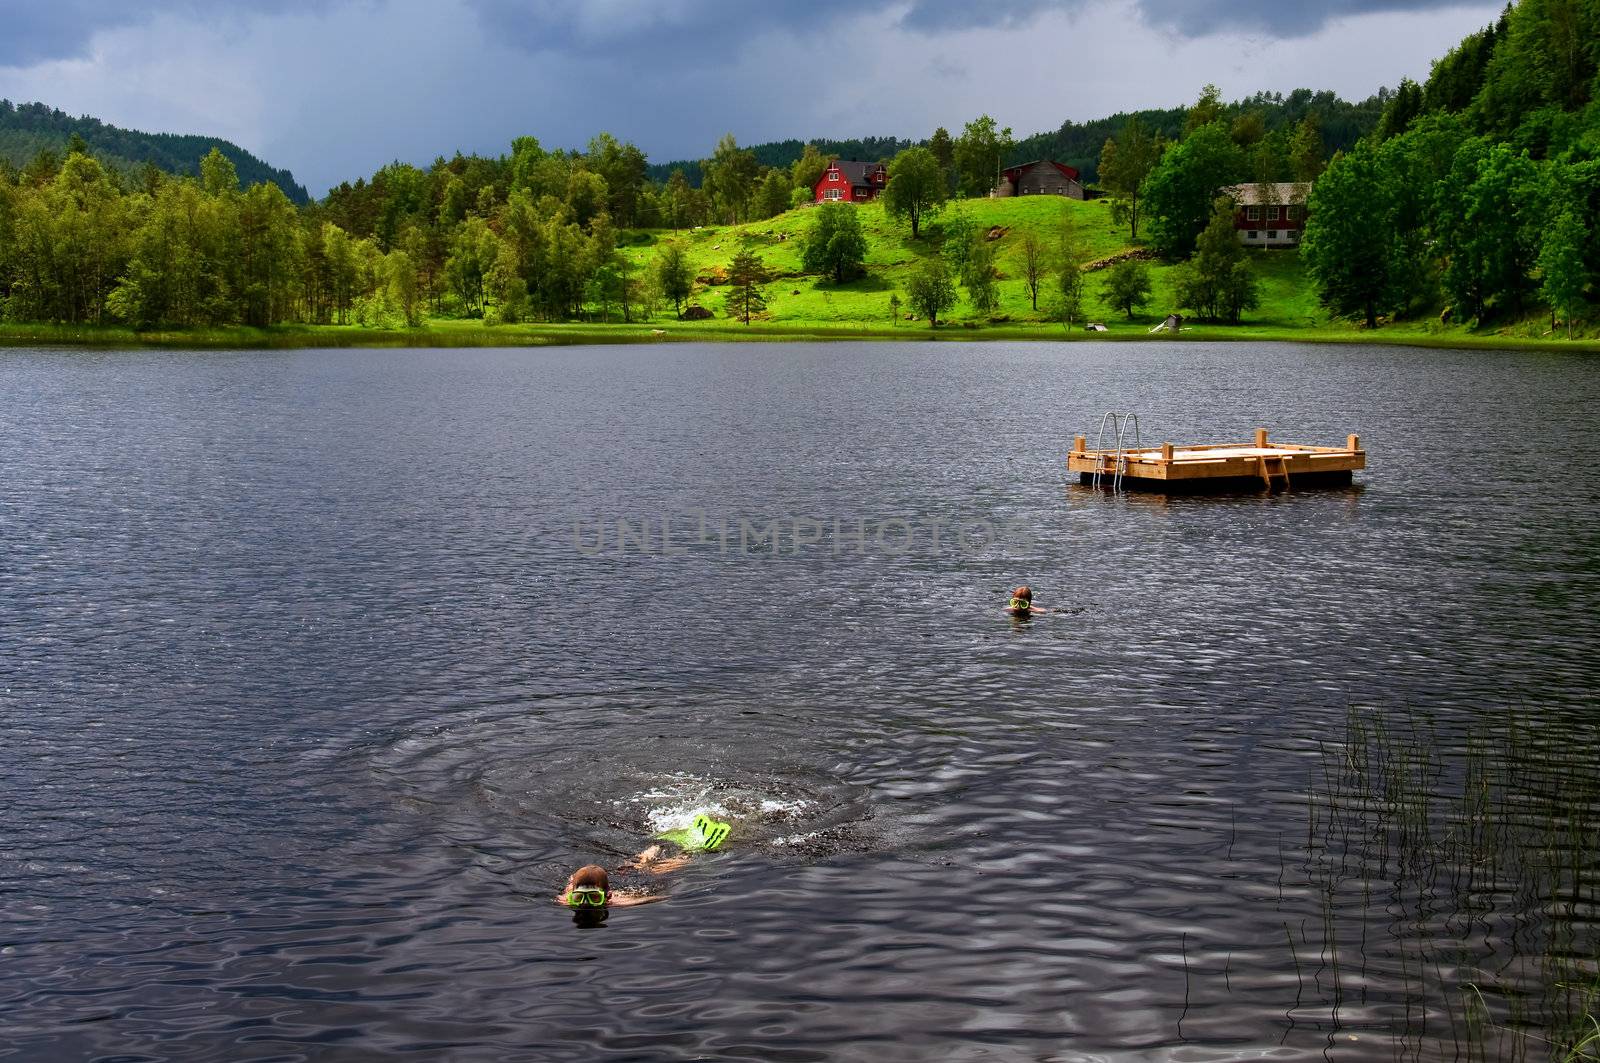 Two children swimming in a lake wearing diving masks